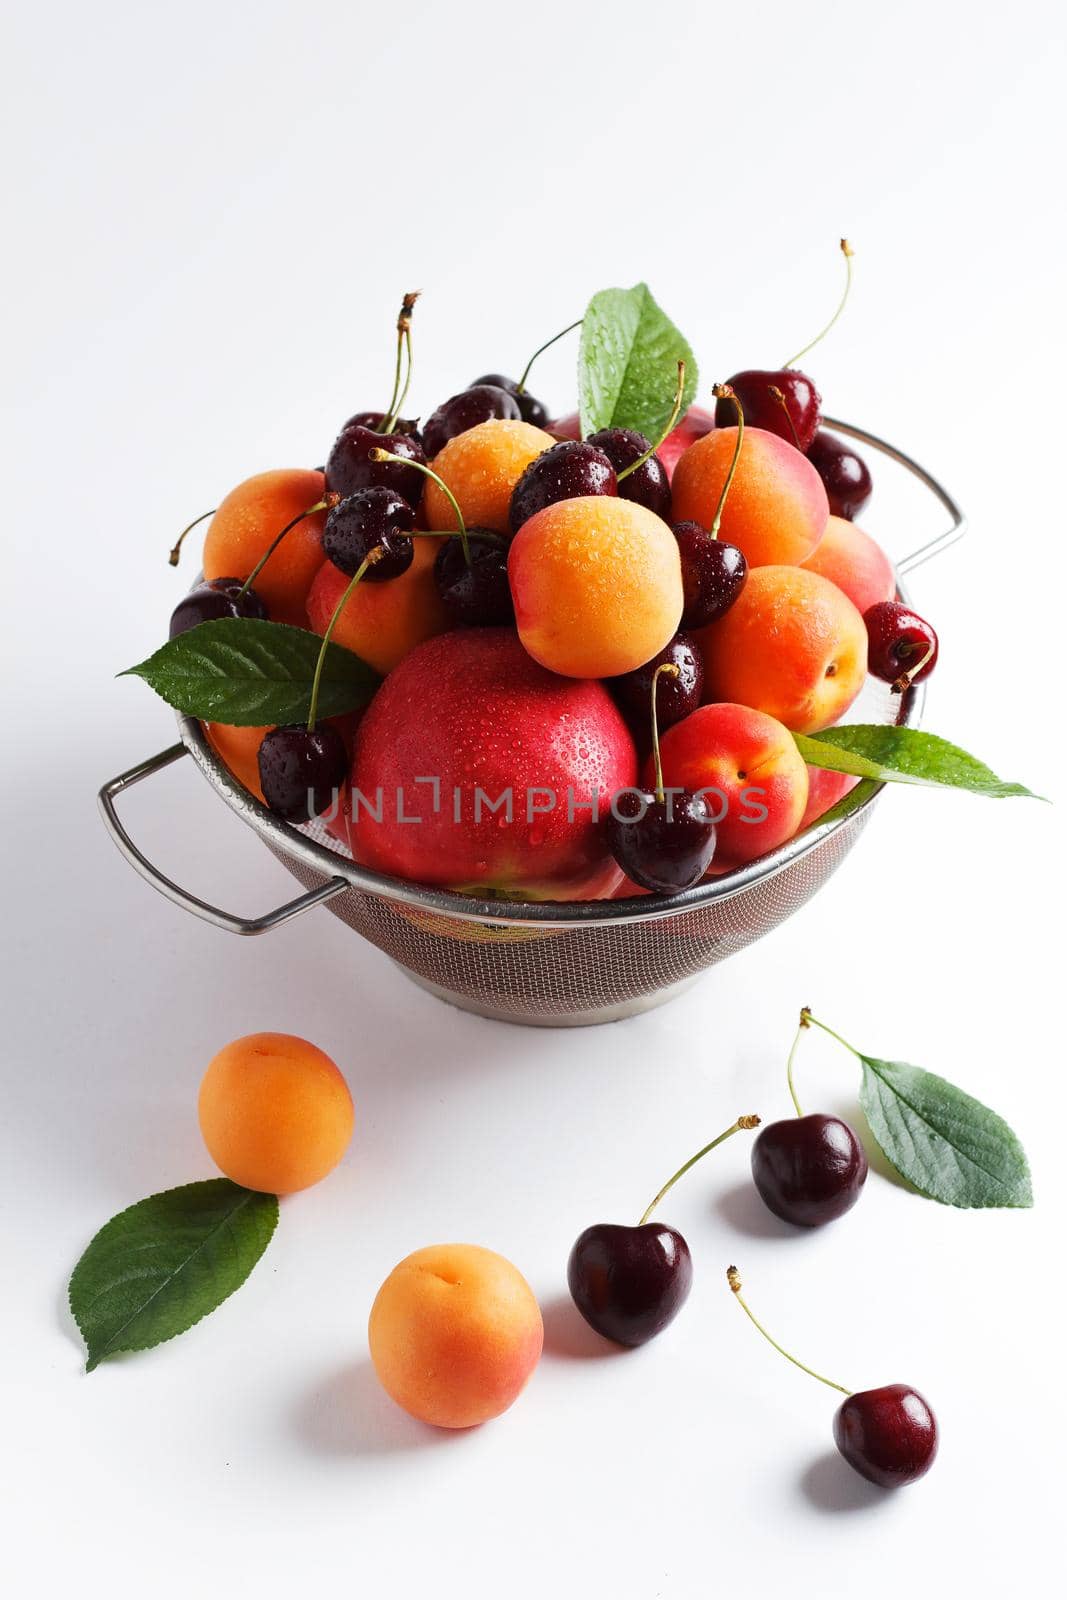 apricots and cherries in a metal bowl on a white background.